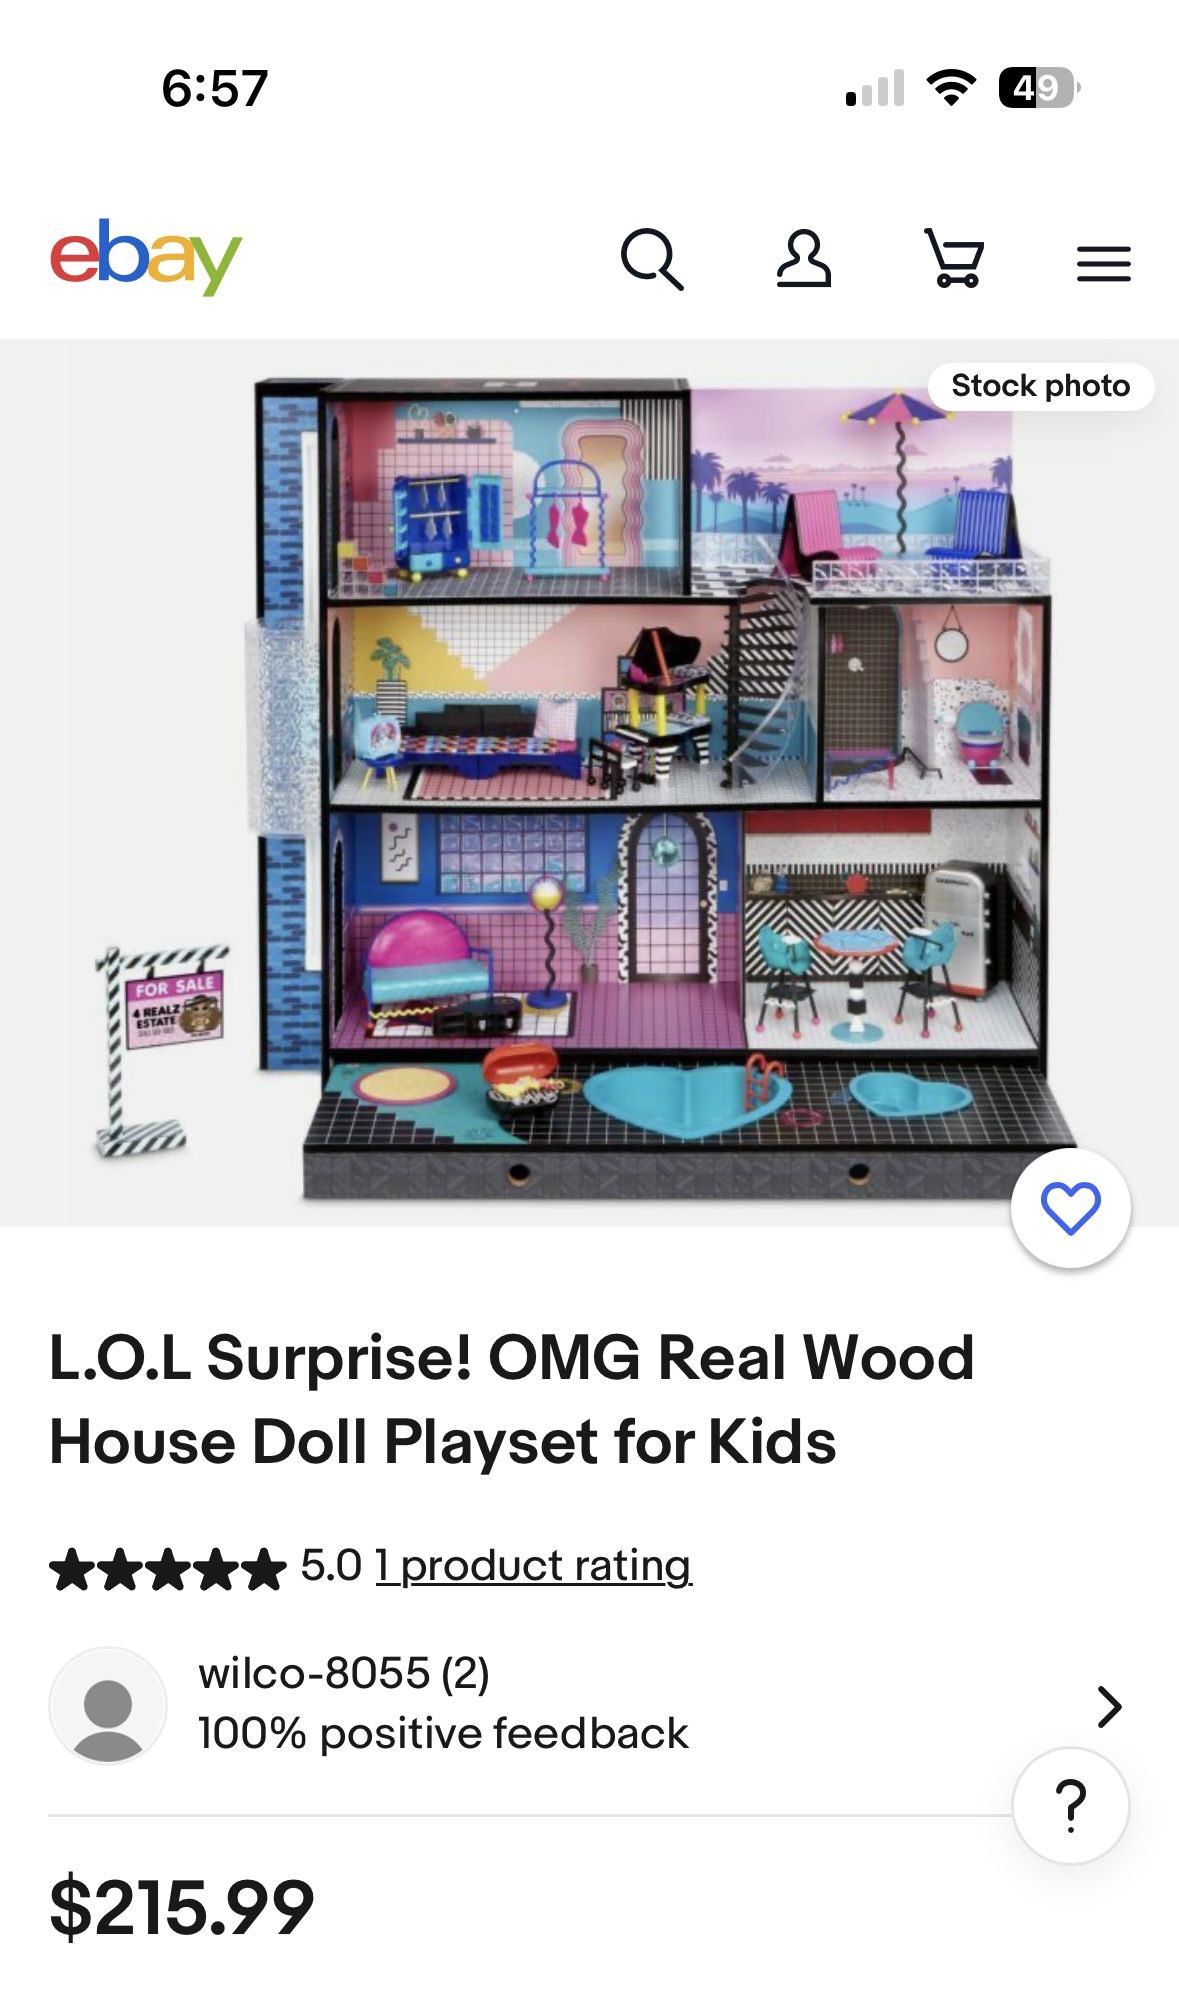 Toys L.O.L Surprise! OMG Real Wood House Doll Playset for Kids